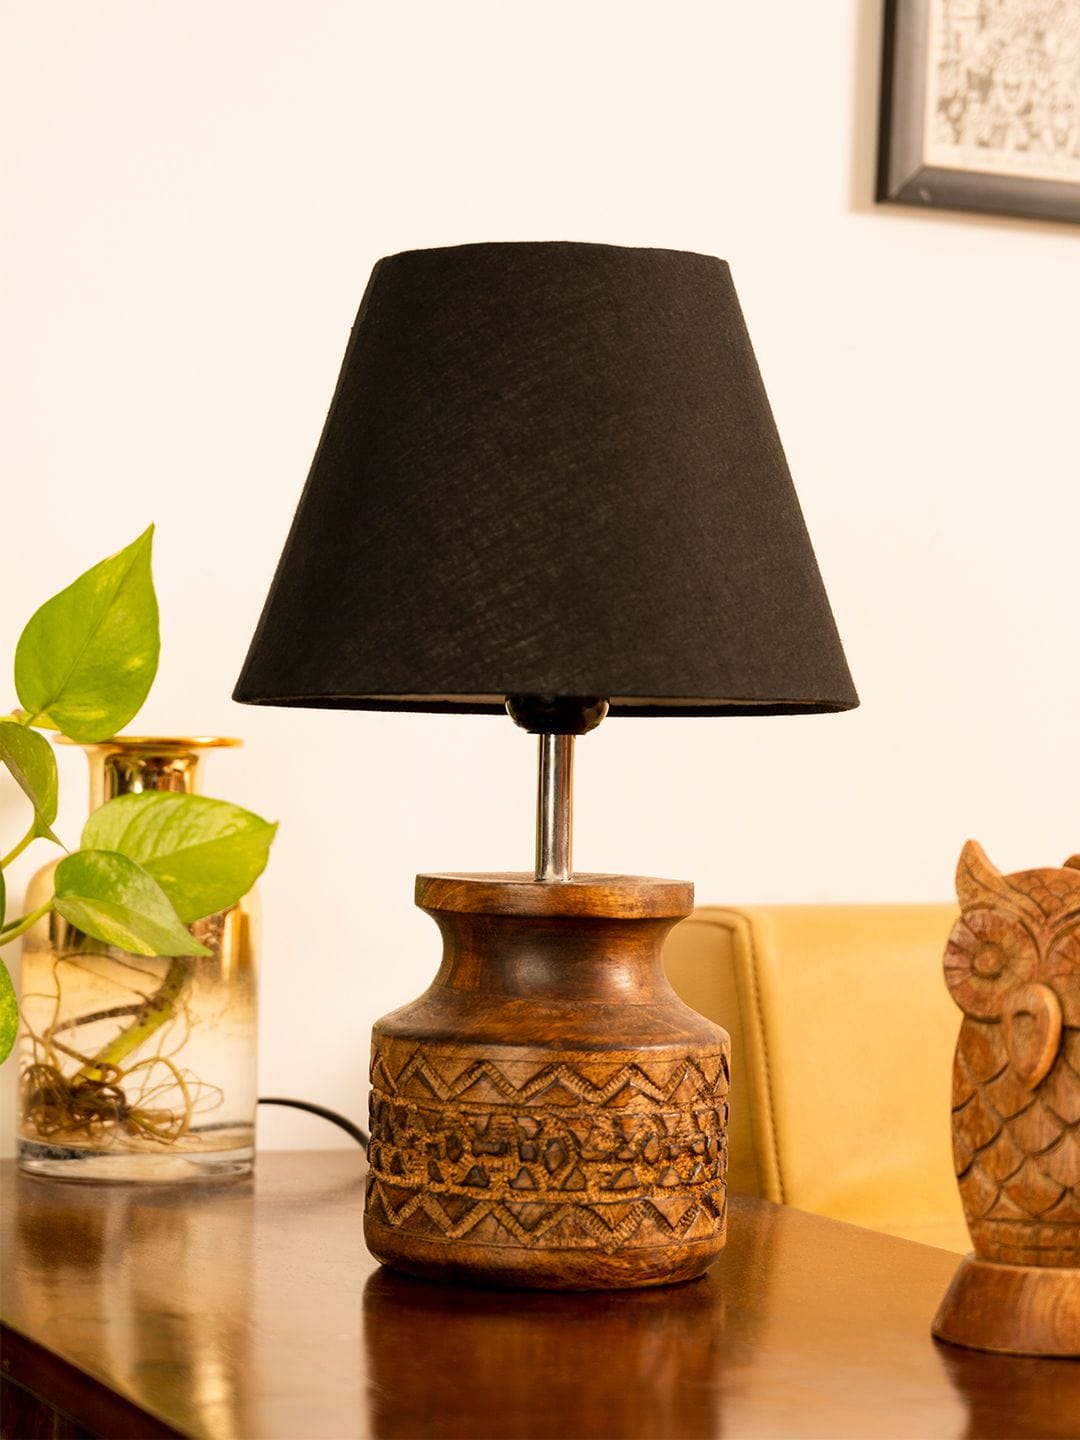 Wooden Carved Lamp with Taper Cotton Black Shade